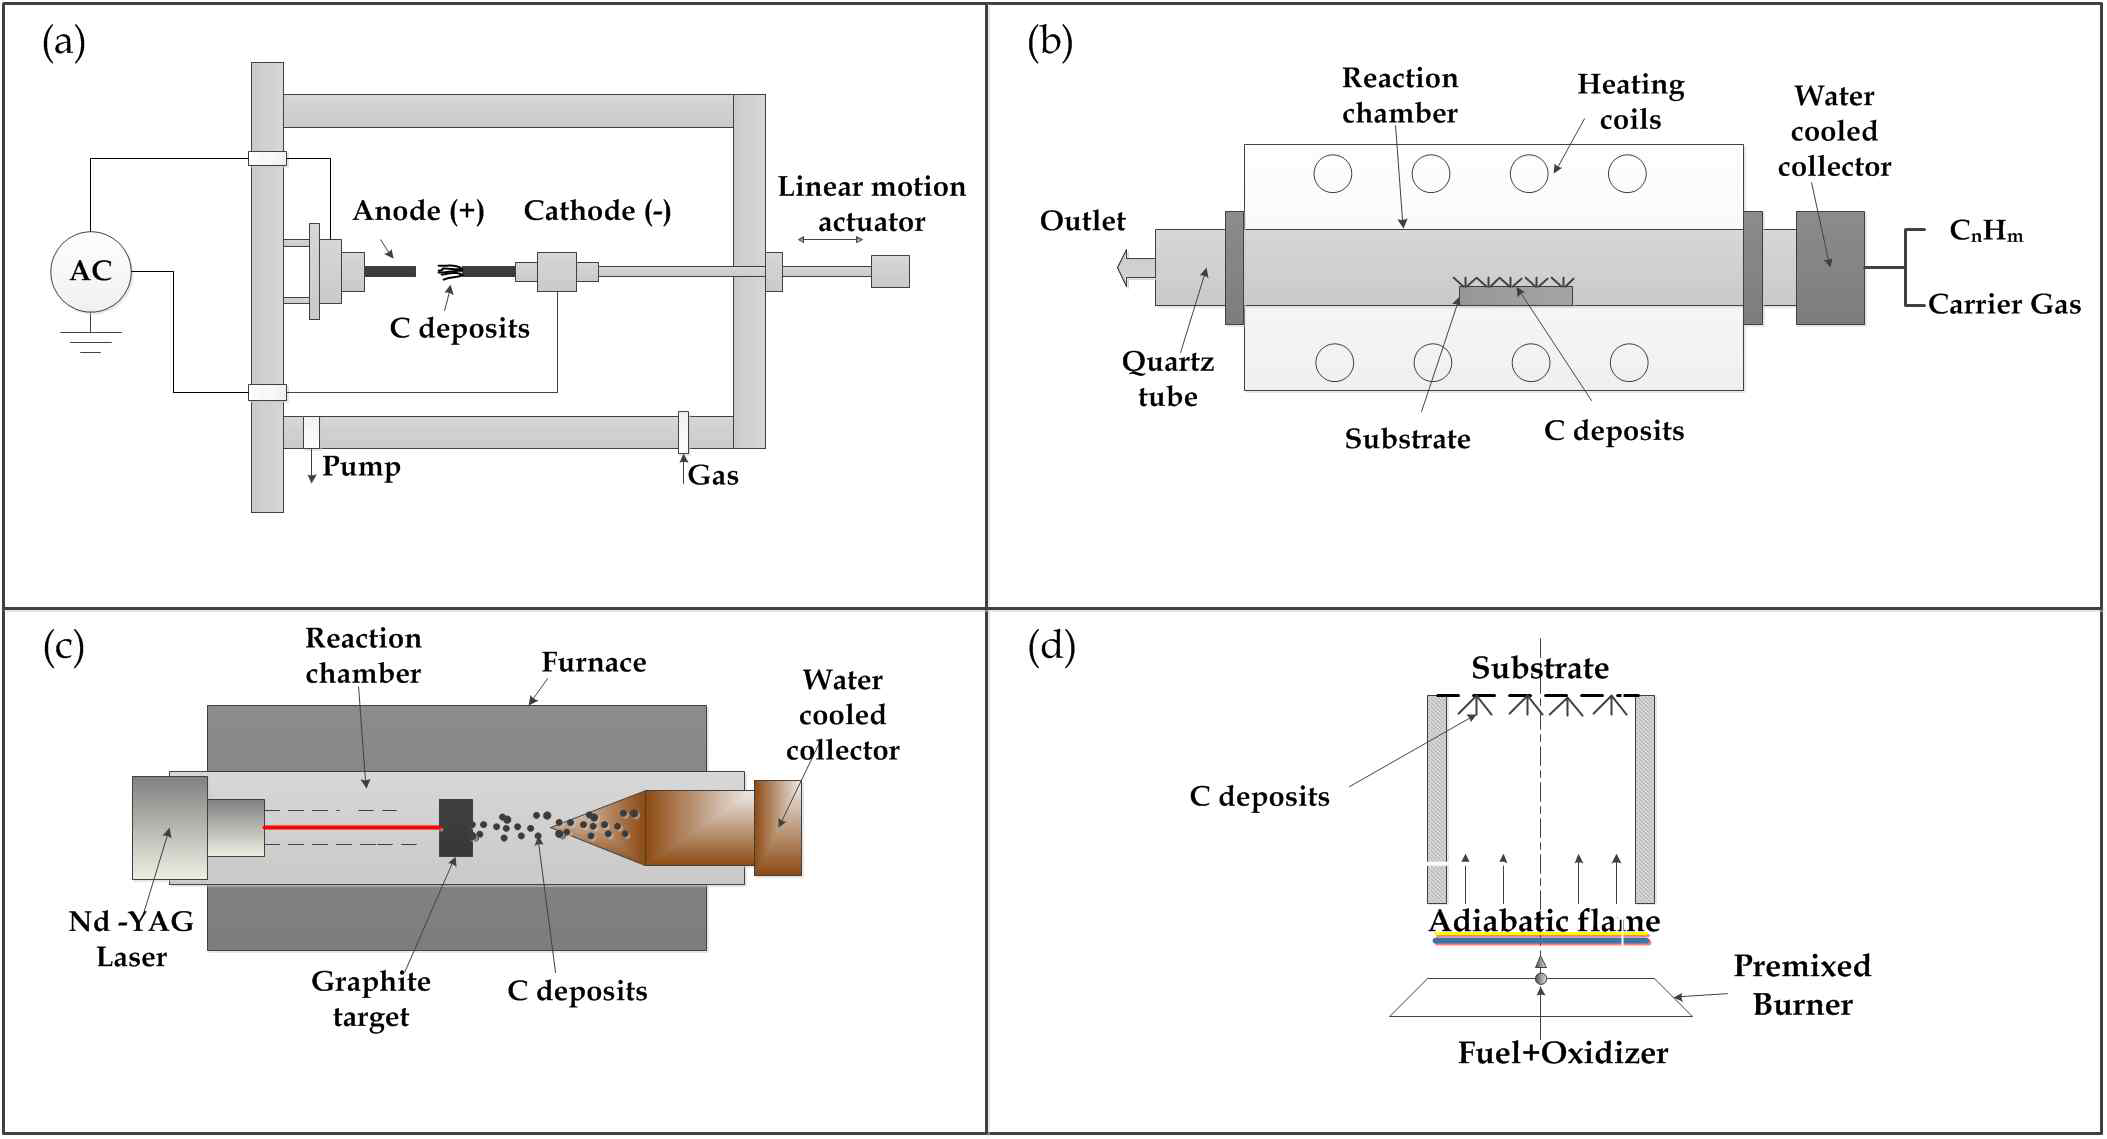 carbon-nanotubes-synthesis-methods, (a) Arc Method, (b)Thermal CVD method, (c) Laser method, and (d) Flame Synthesis